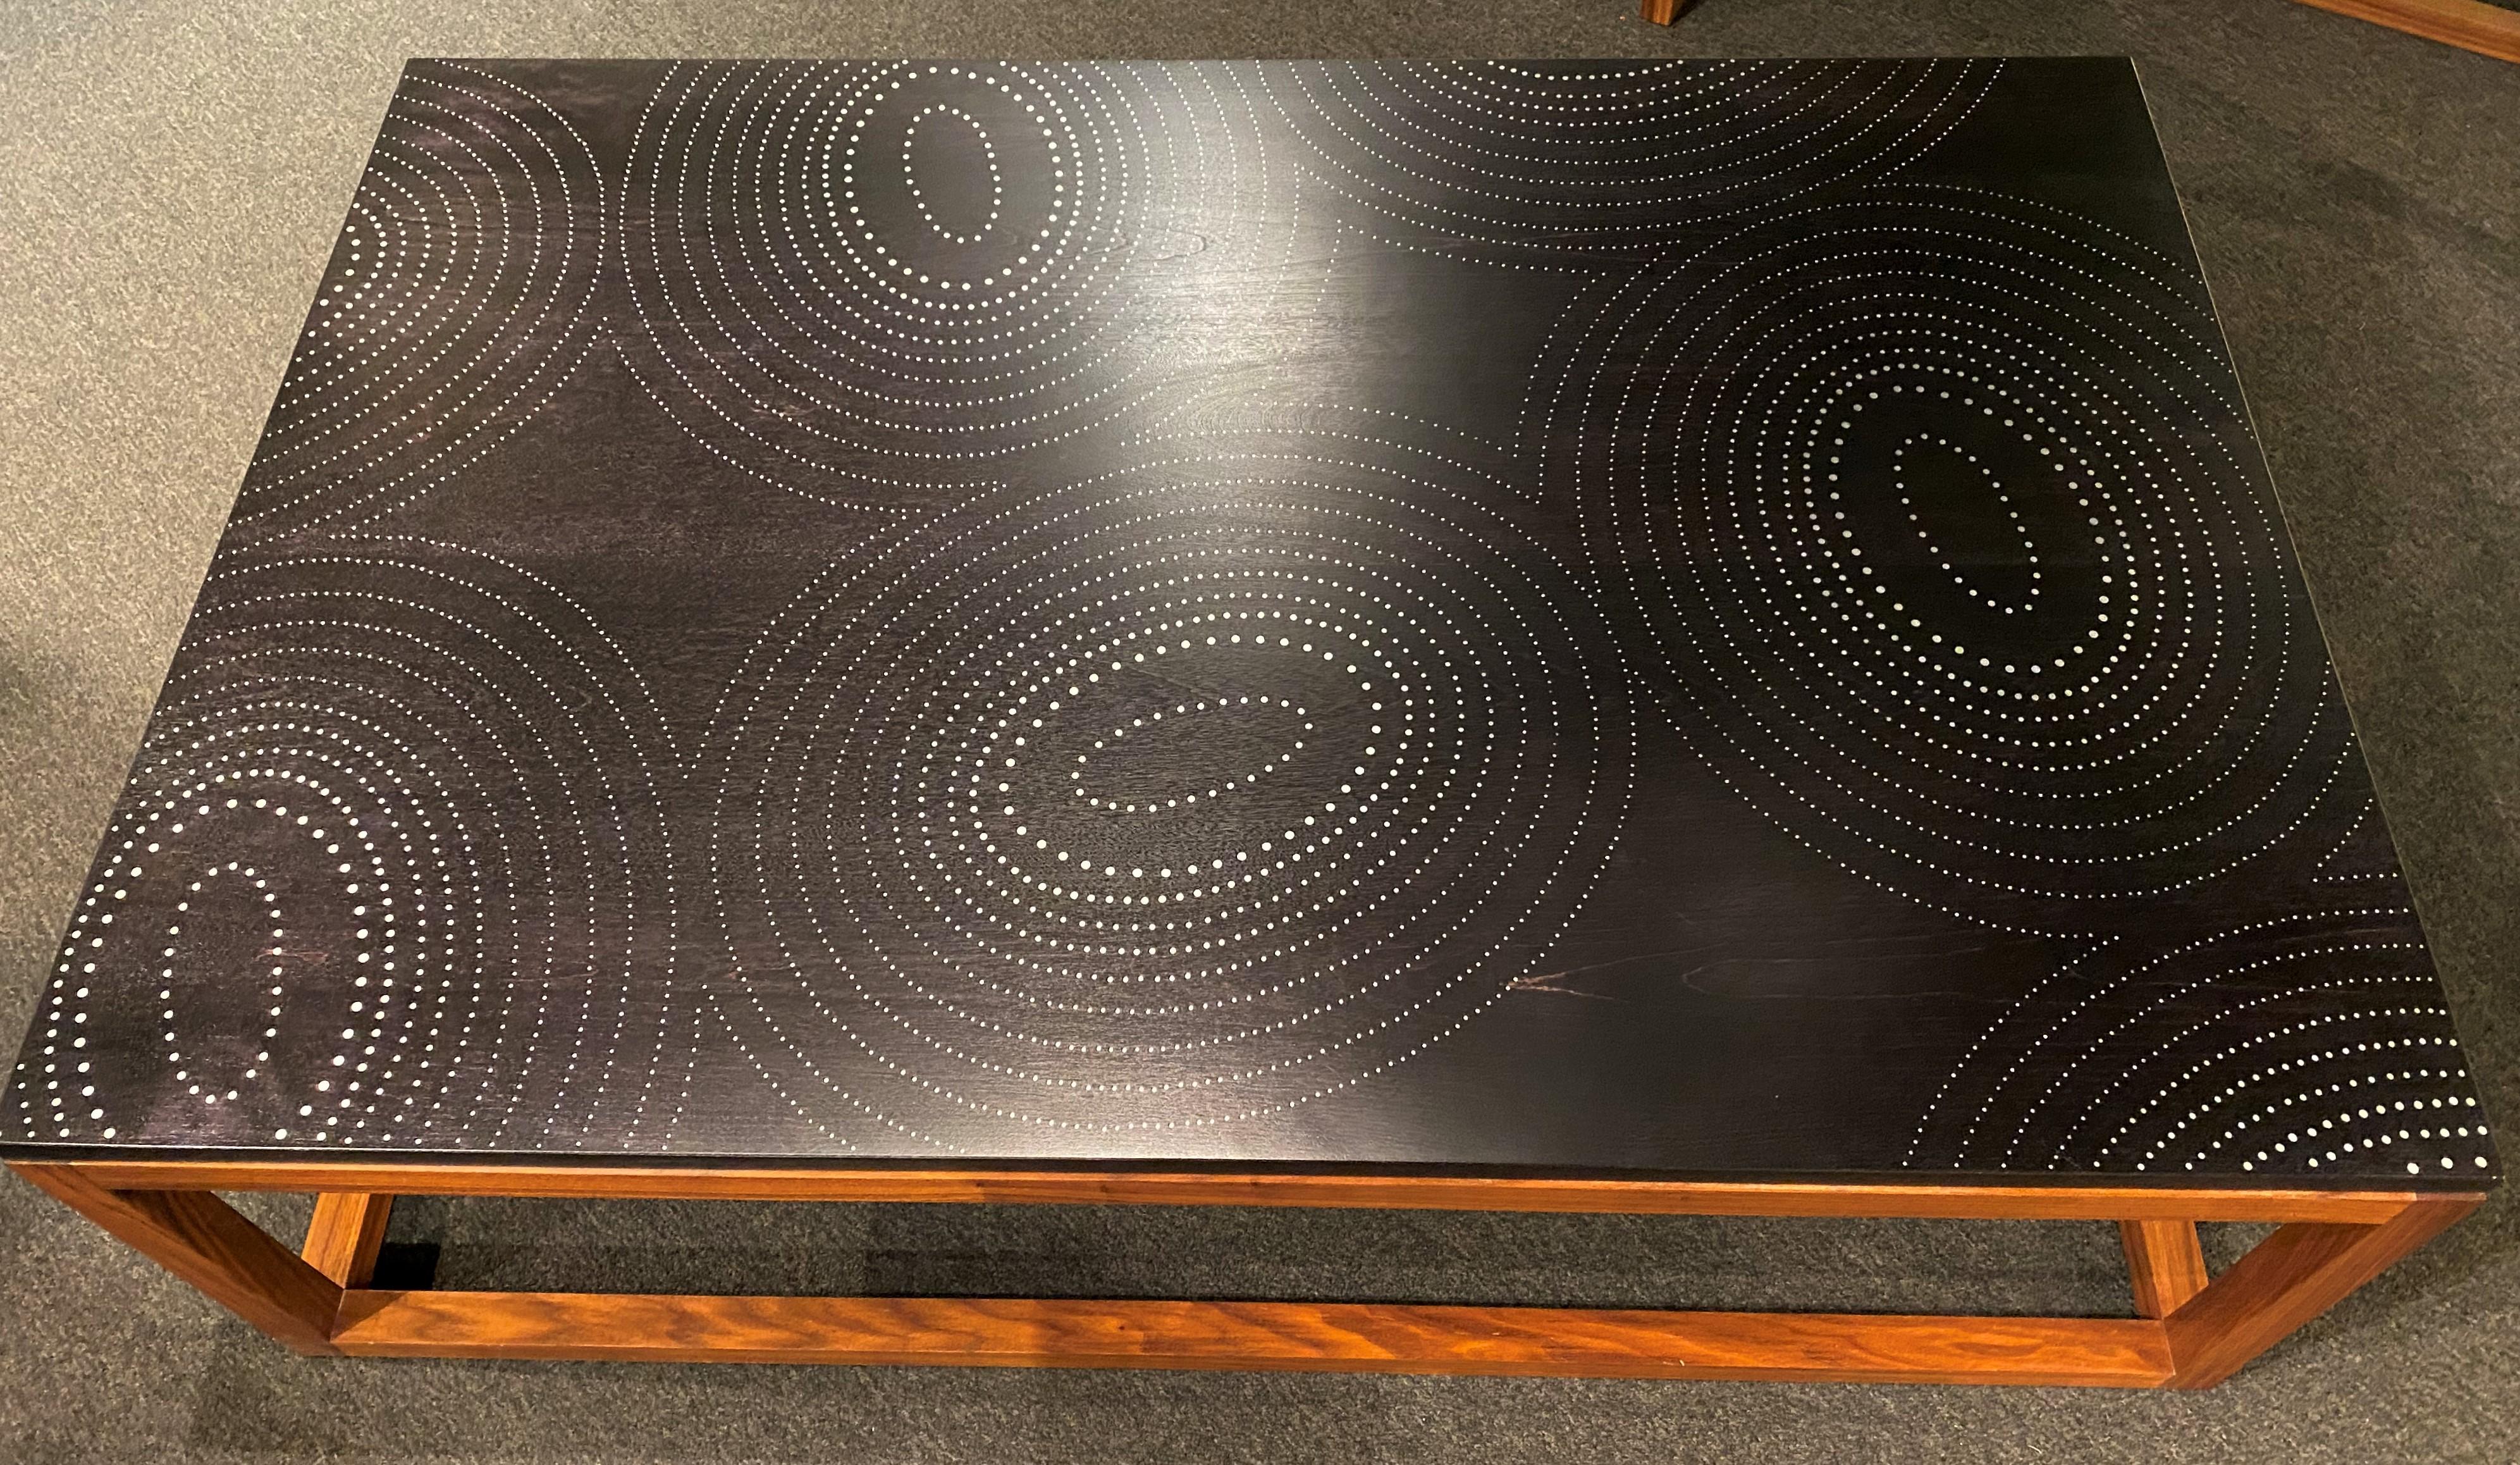 A fine custom modernist rectangular walnut low table with aluminum nail concentric circle inlay, handcrafted by Peter Sandback. Sandback has gained a national reputation for his intricate pattern work of inlaid nails set into minimalist handmade